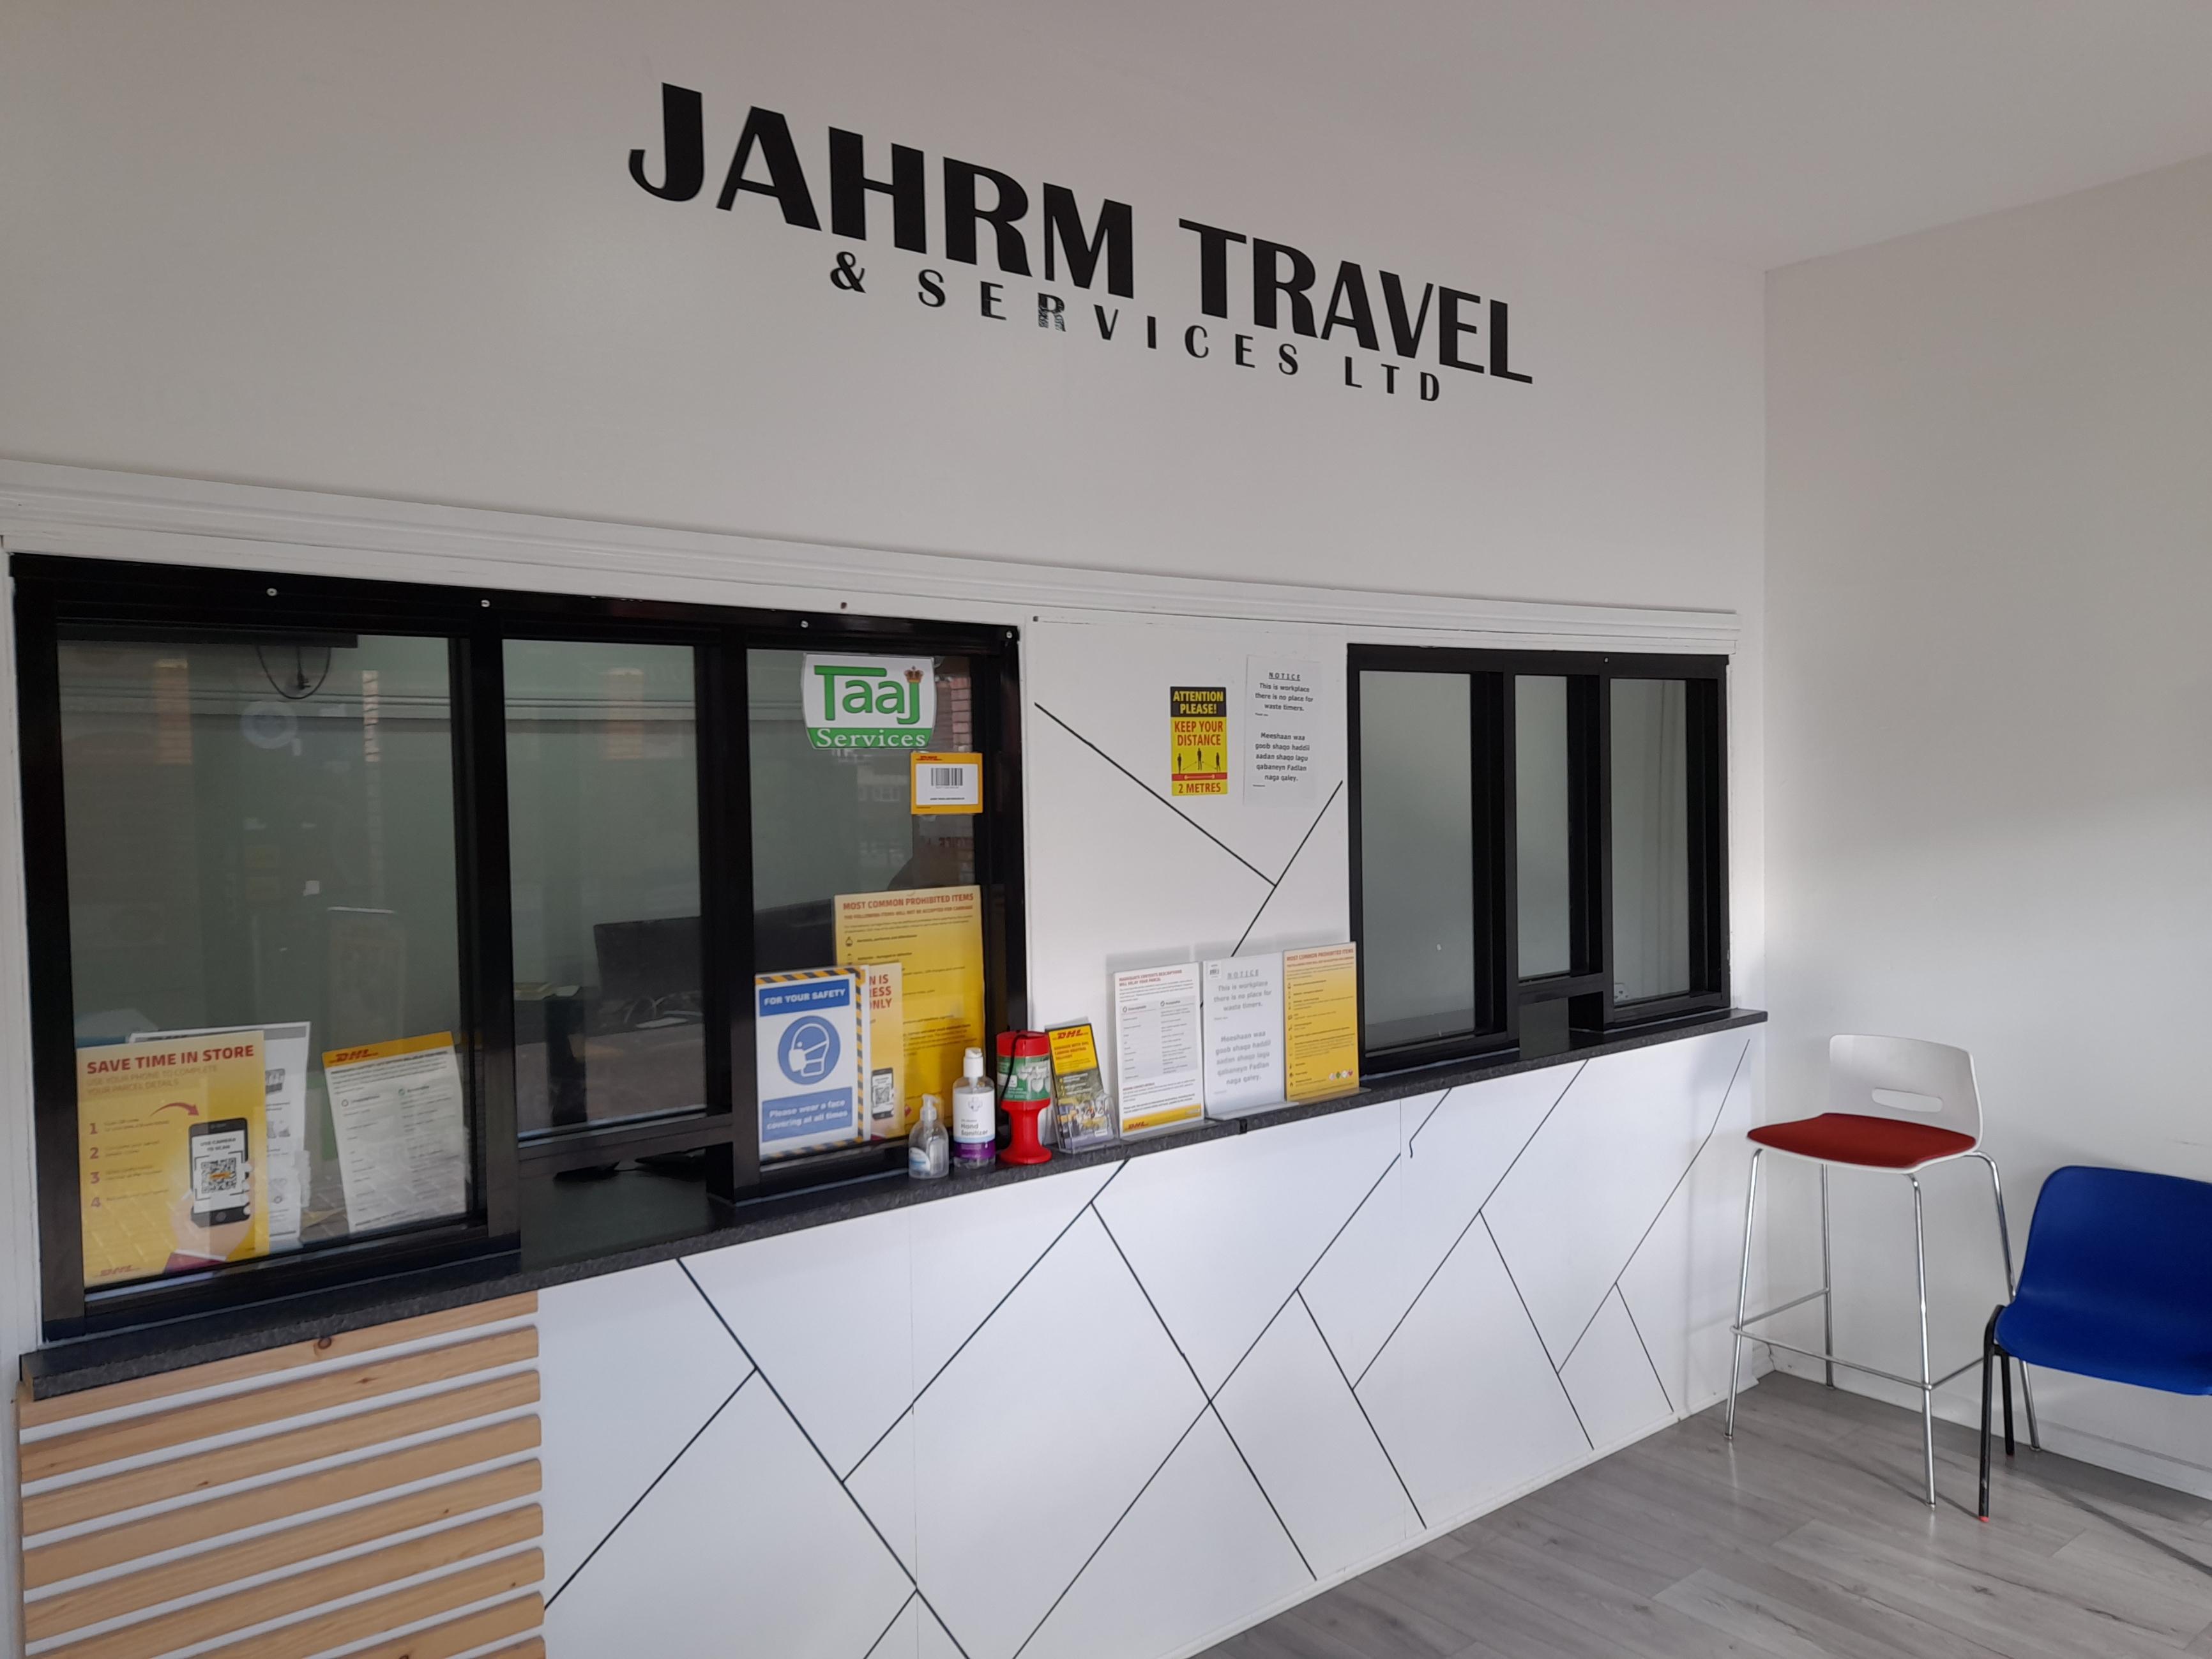 Images DHL Express Service Point (Jahrm Travel and Services Ltd)